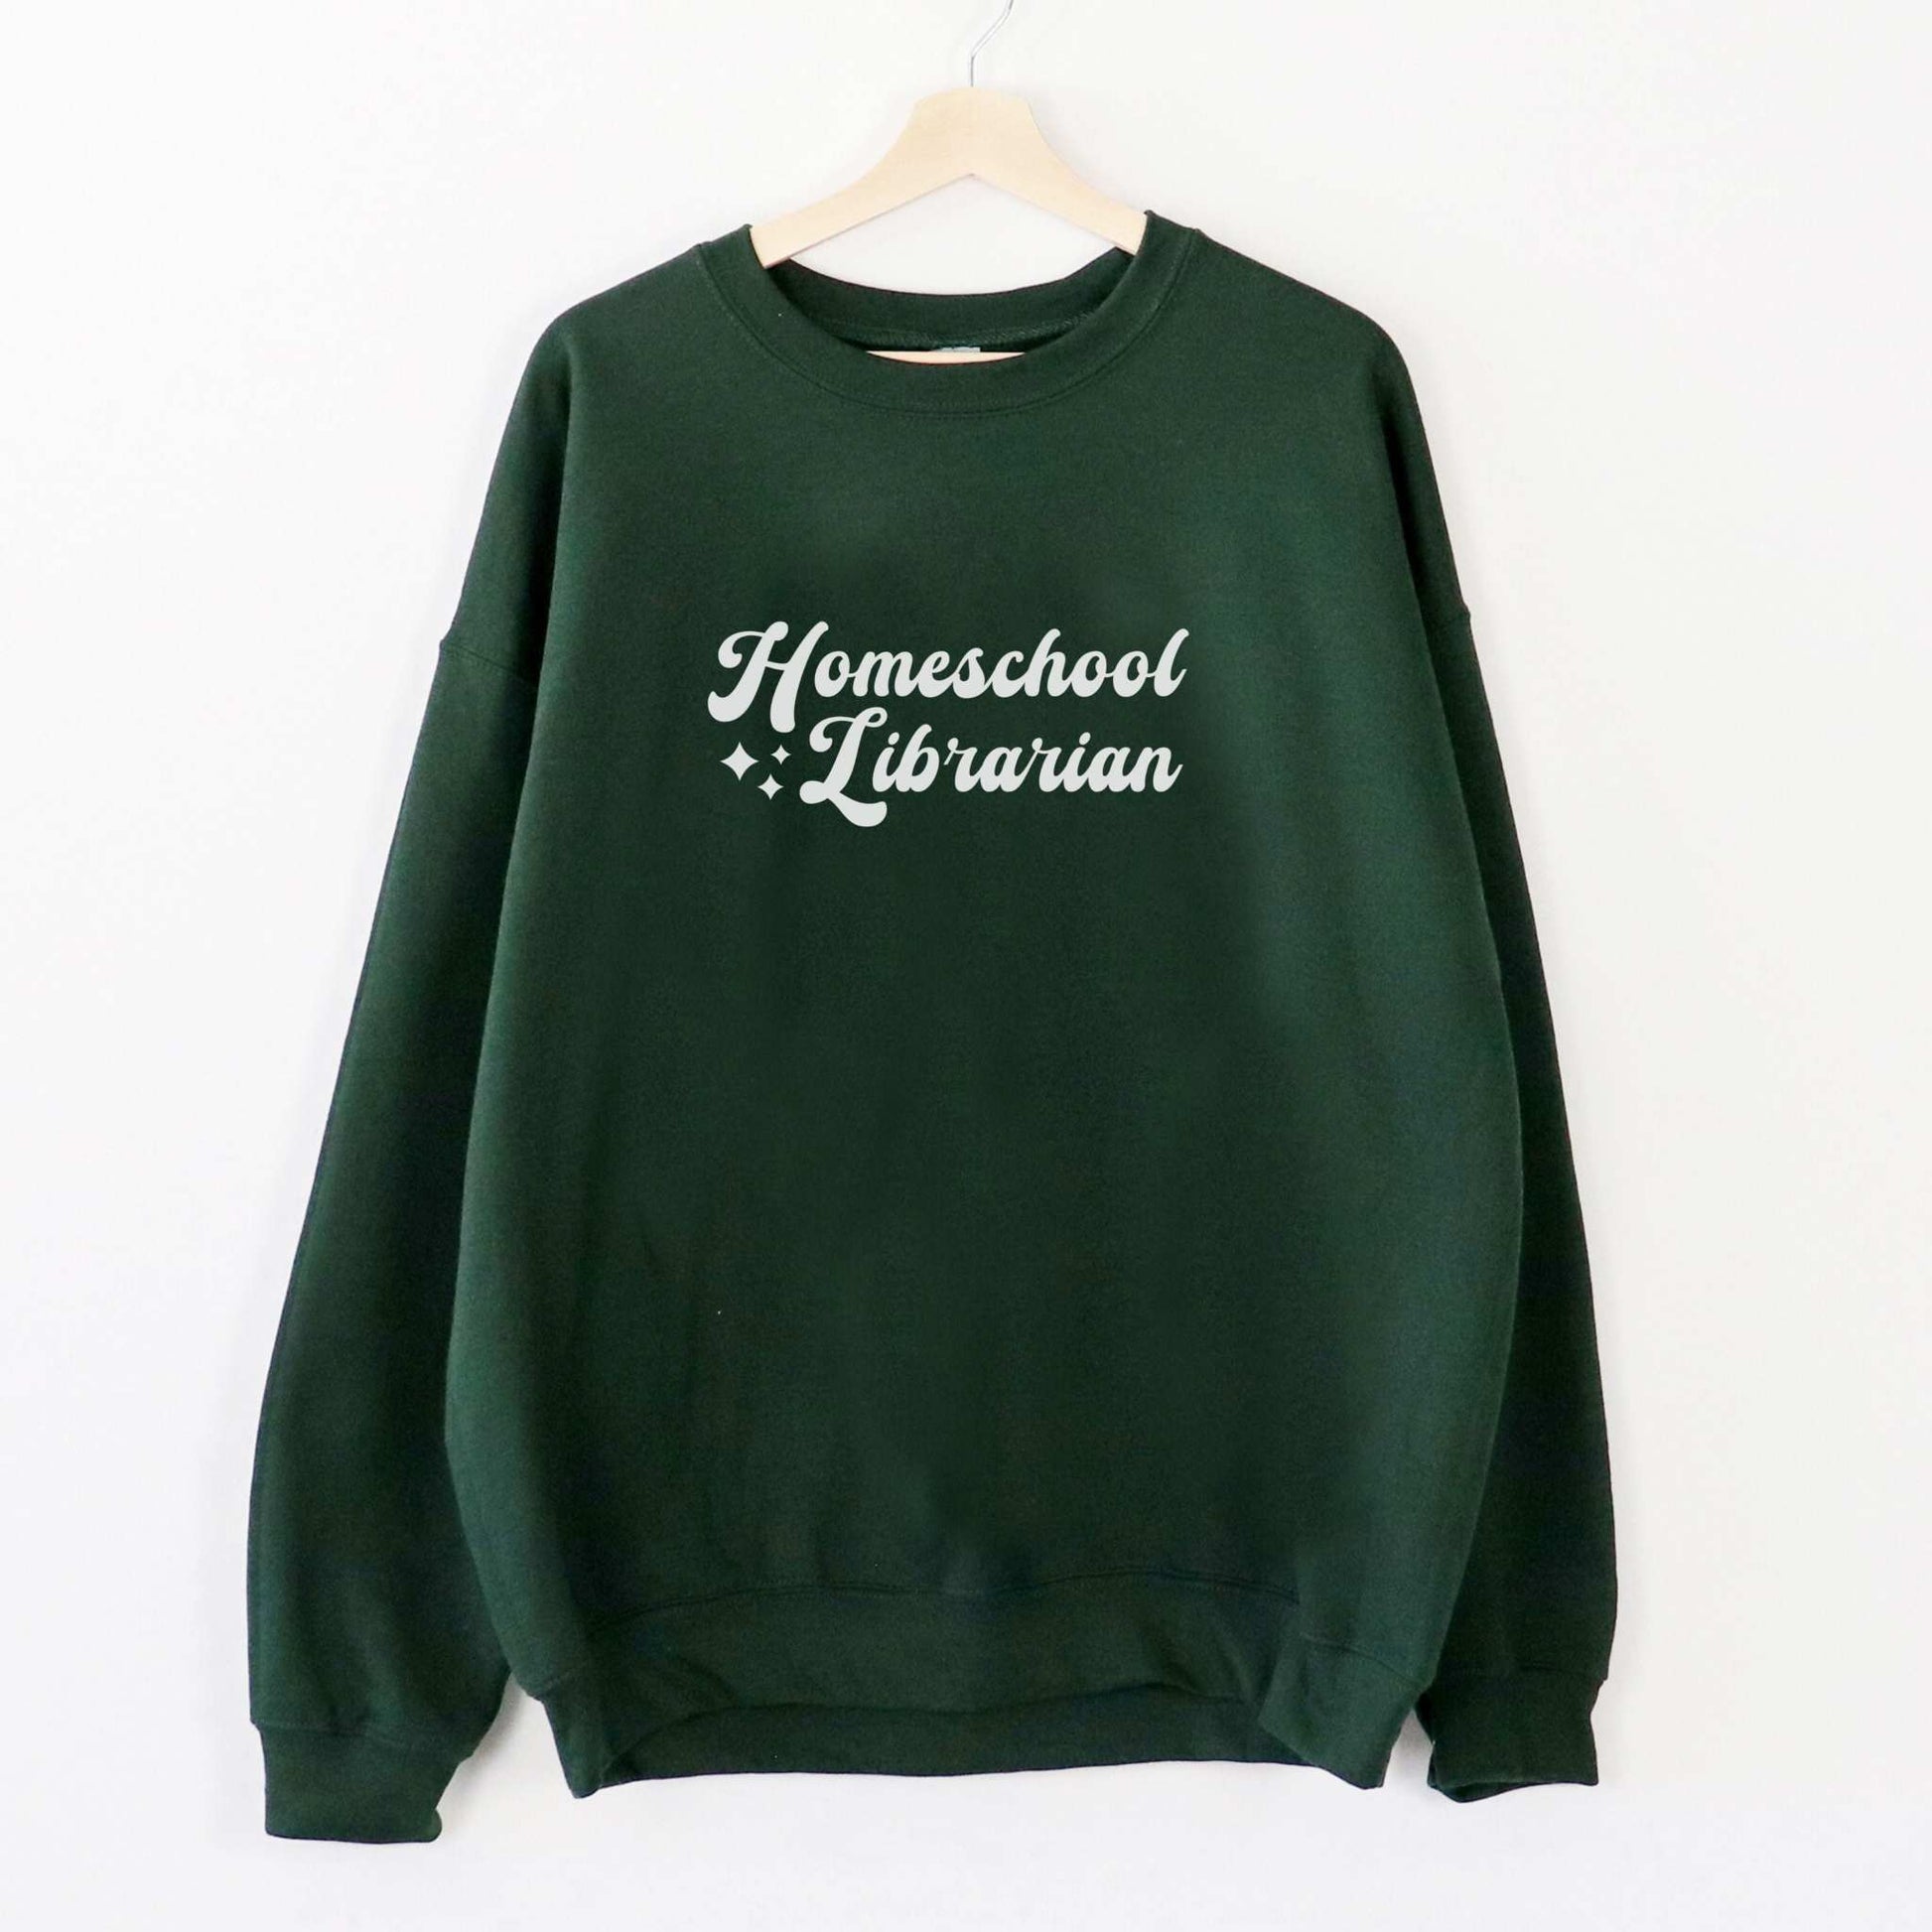 Homeschool Librarian Crewneck SweatshirtWolfe Paw DesignsHomeschool Librarian Crewneck SweatshirtJust one more book won't hurt, right?
Available in Adult t-shirt
Gildan Unisex Fit
50% cotton, 50% polyesterMedium-heavy fabricLoose fit



 
S
M
L
XL
2XL
3XL
4XL
5XHomeschool Librarian Crewneck Sweatshirt